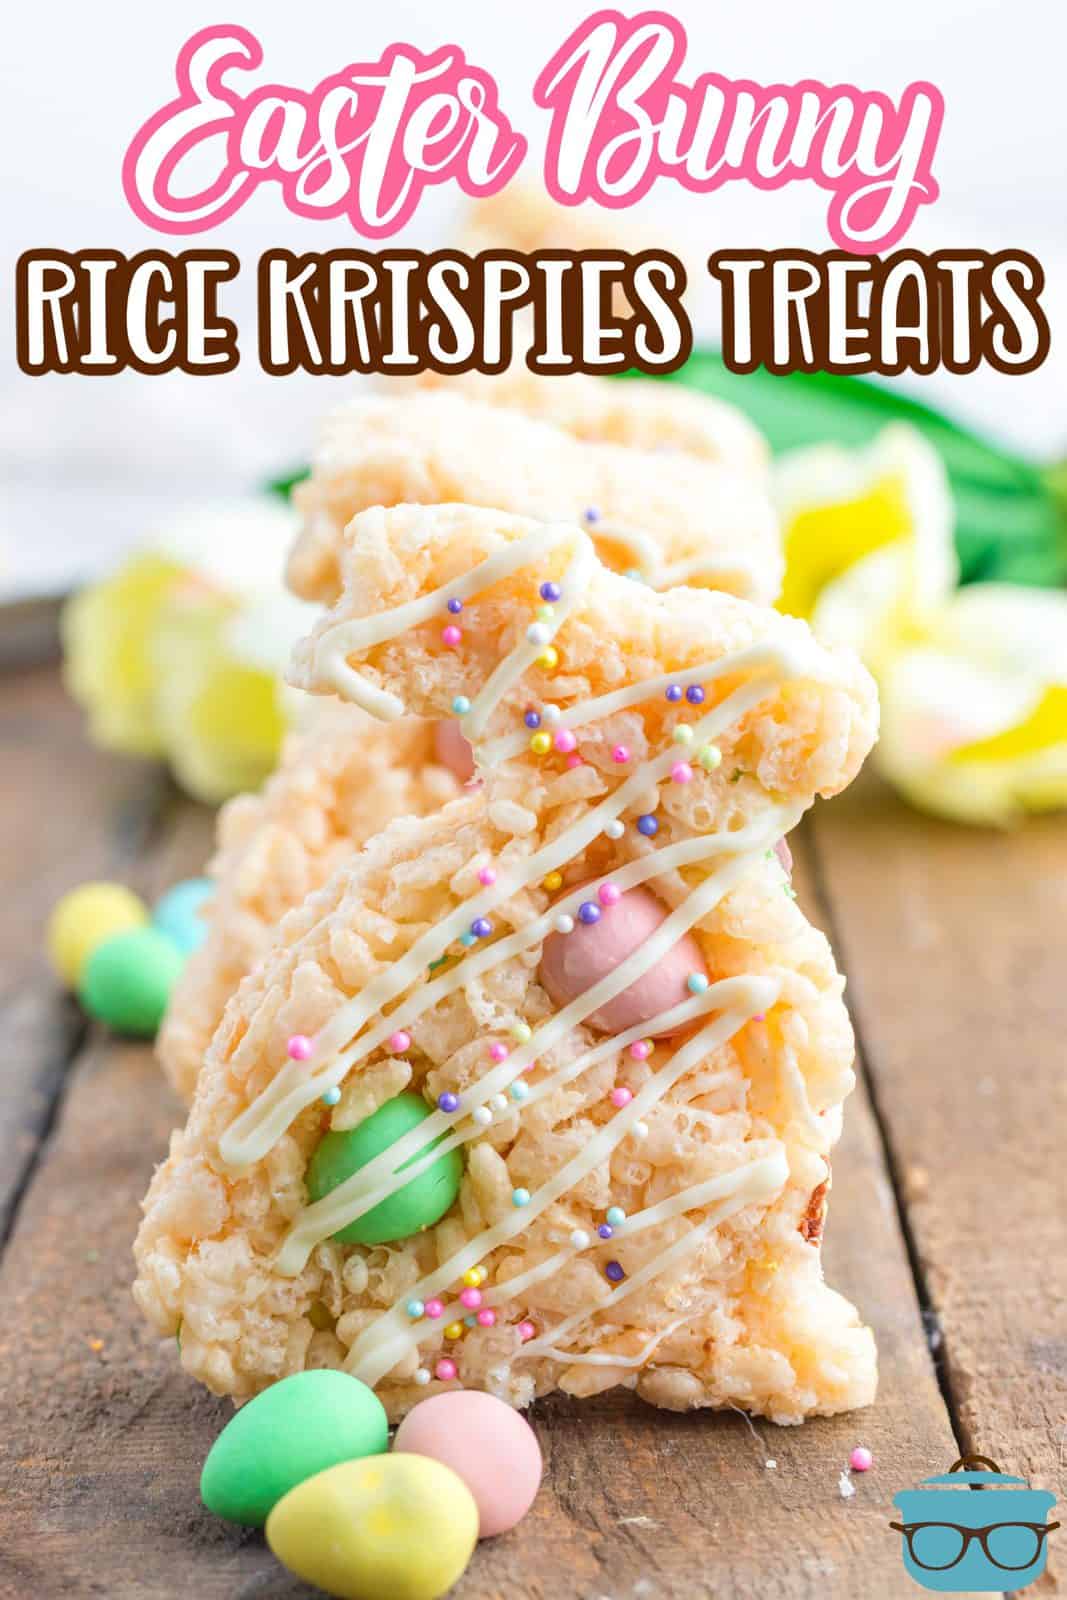 Pinterest image of Easter Bunny Rice Krispies Treats standing up in a row on wooden board with mini cadbury eggs.